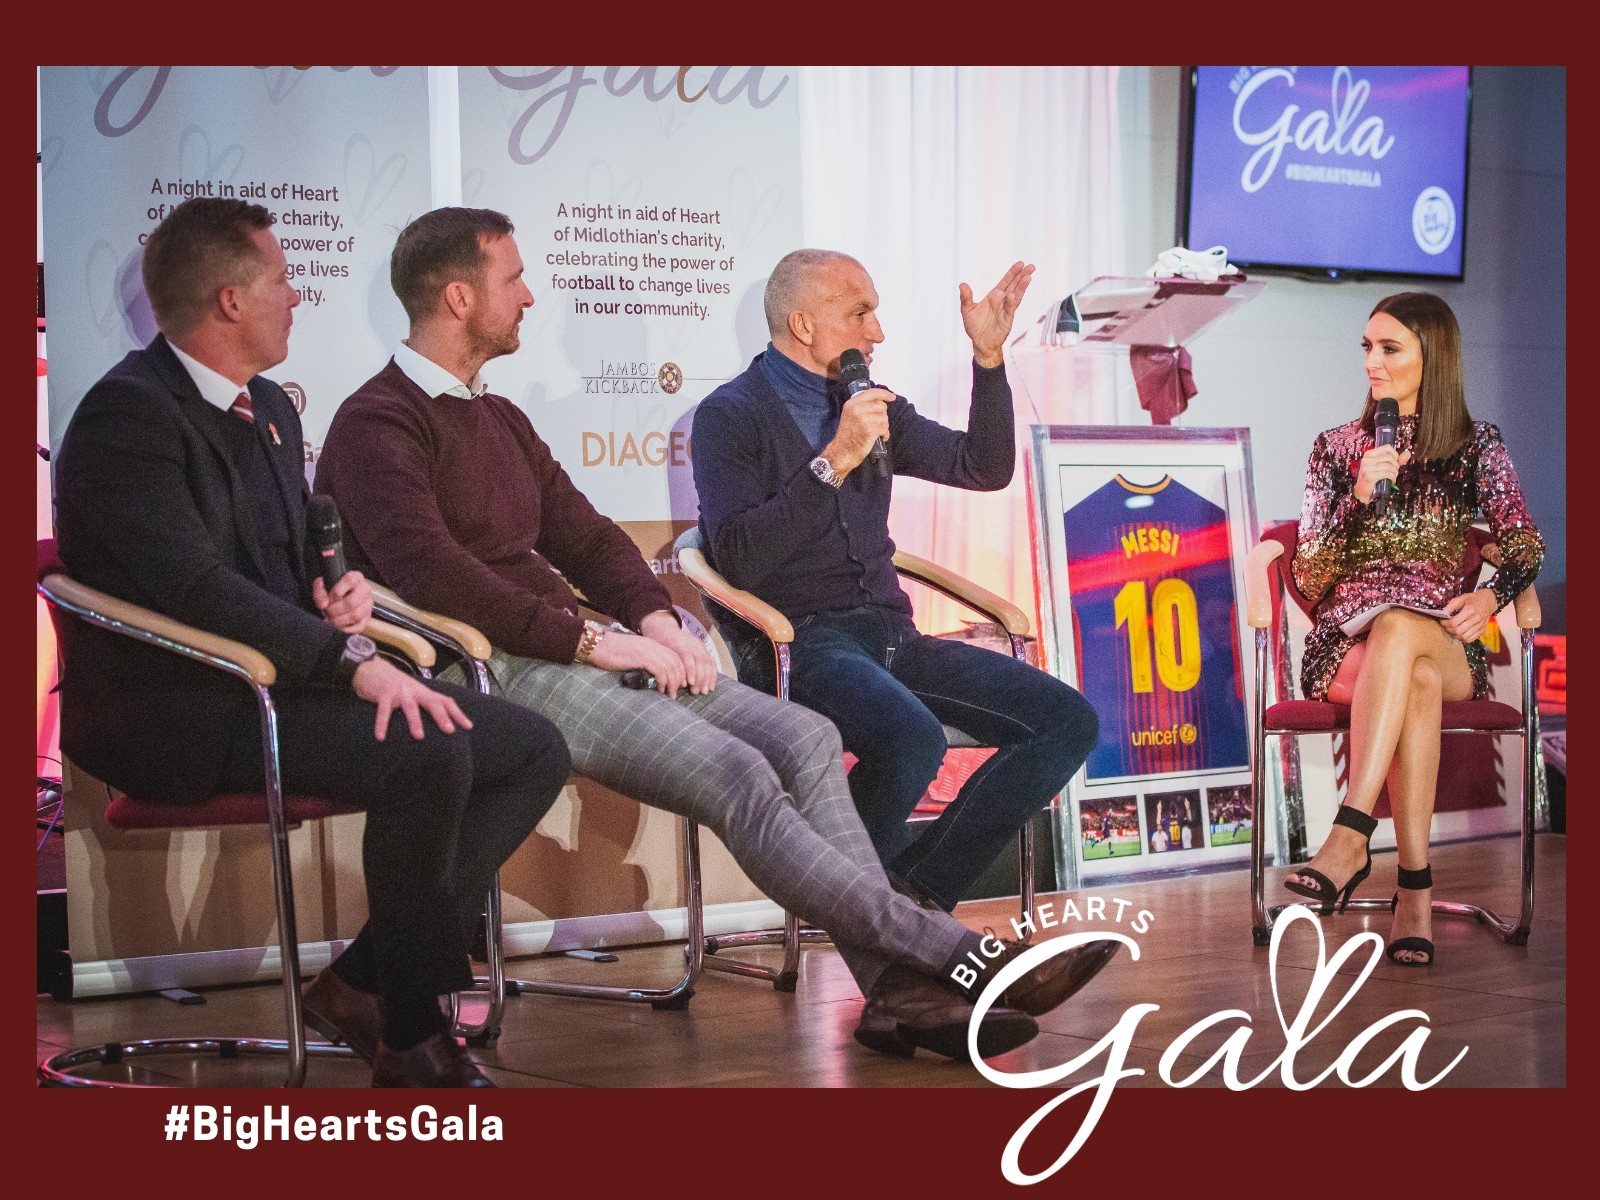  » Big Hearts Gala: Over 15,000 raised at our first Gala fundraiser!